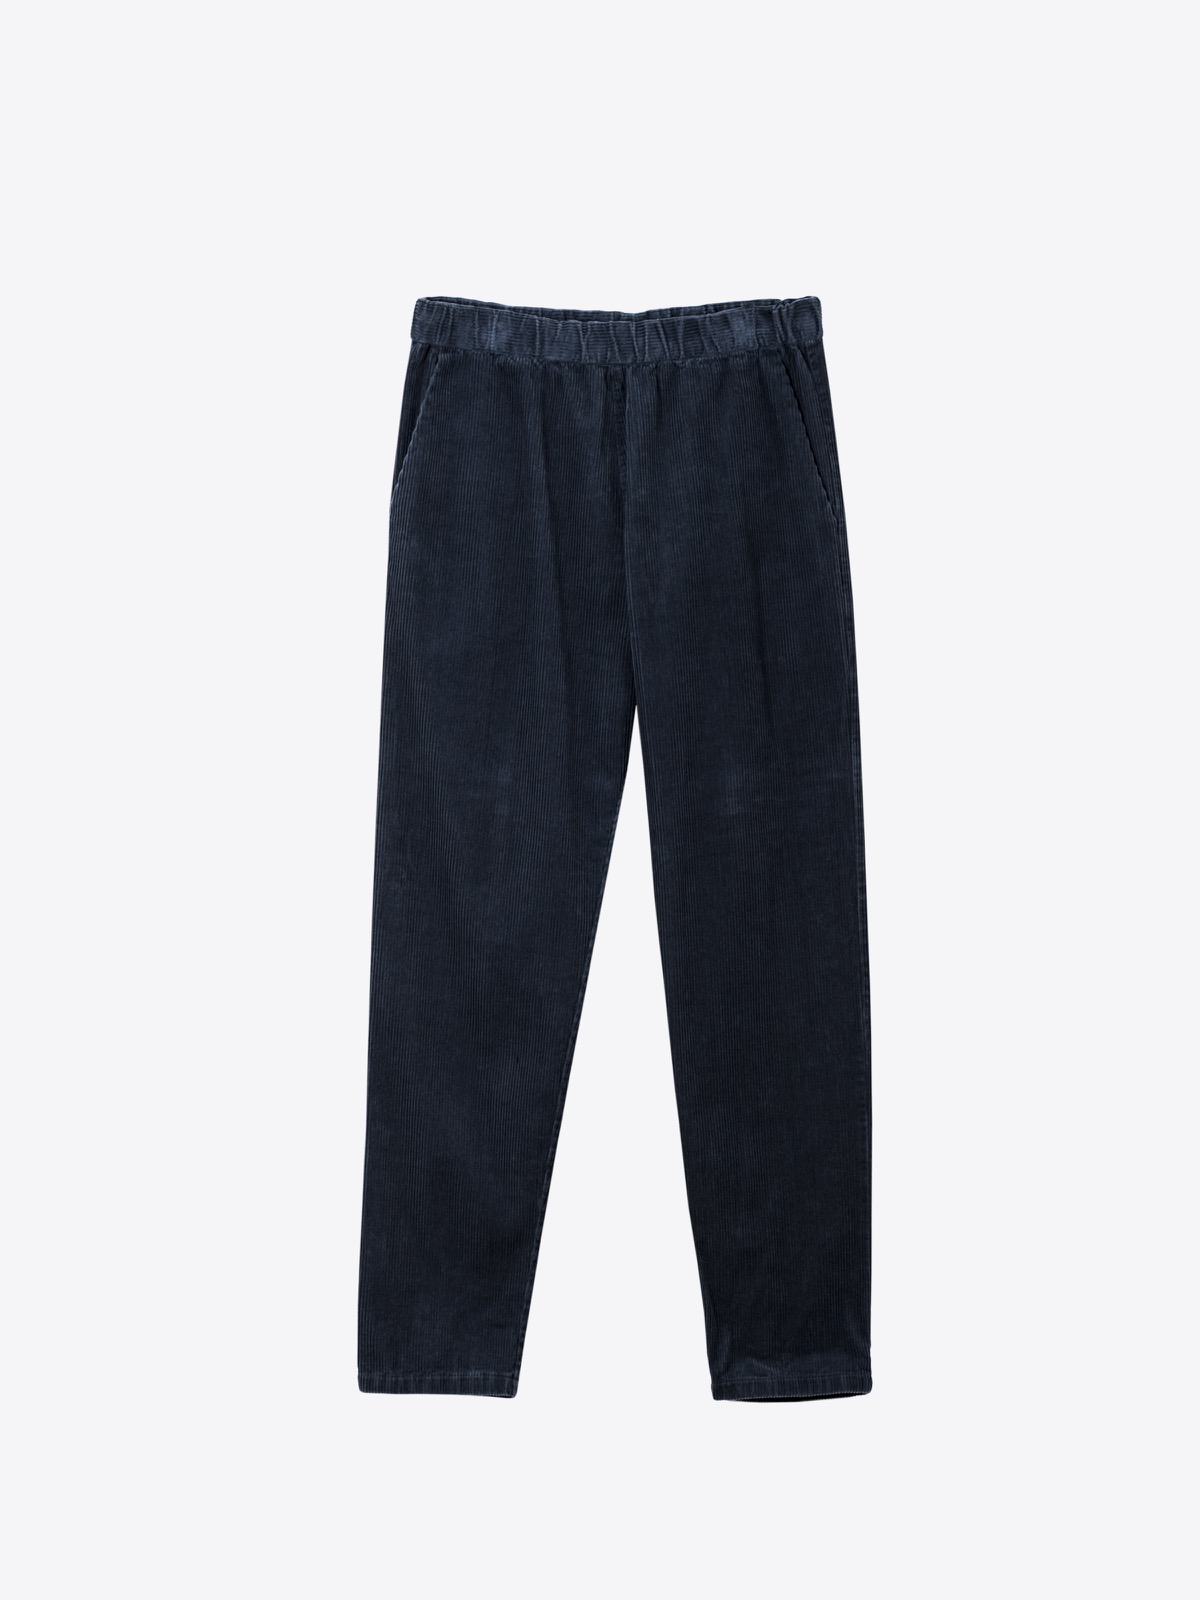 A2 lieblingstrousers | 012 | washed soft corduroy | navy